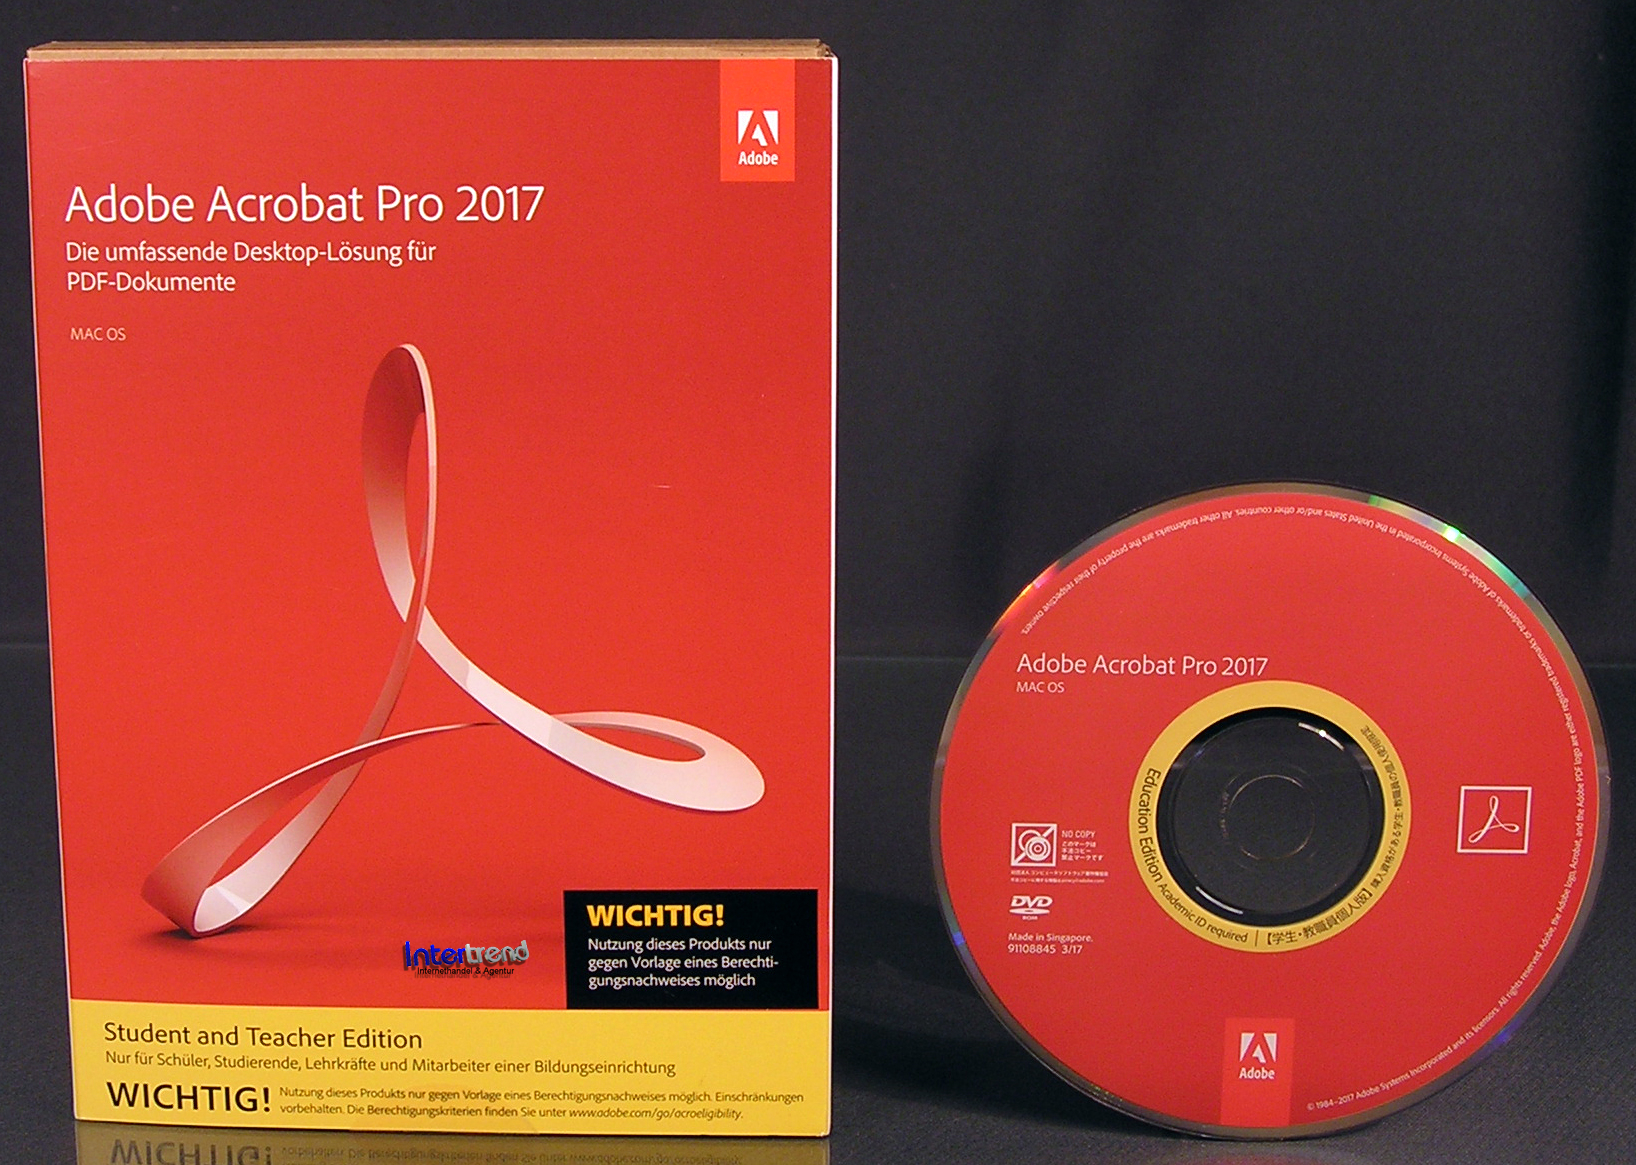 download adobe acrobat pro 2017 student and teacher edition